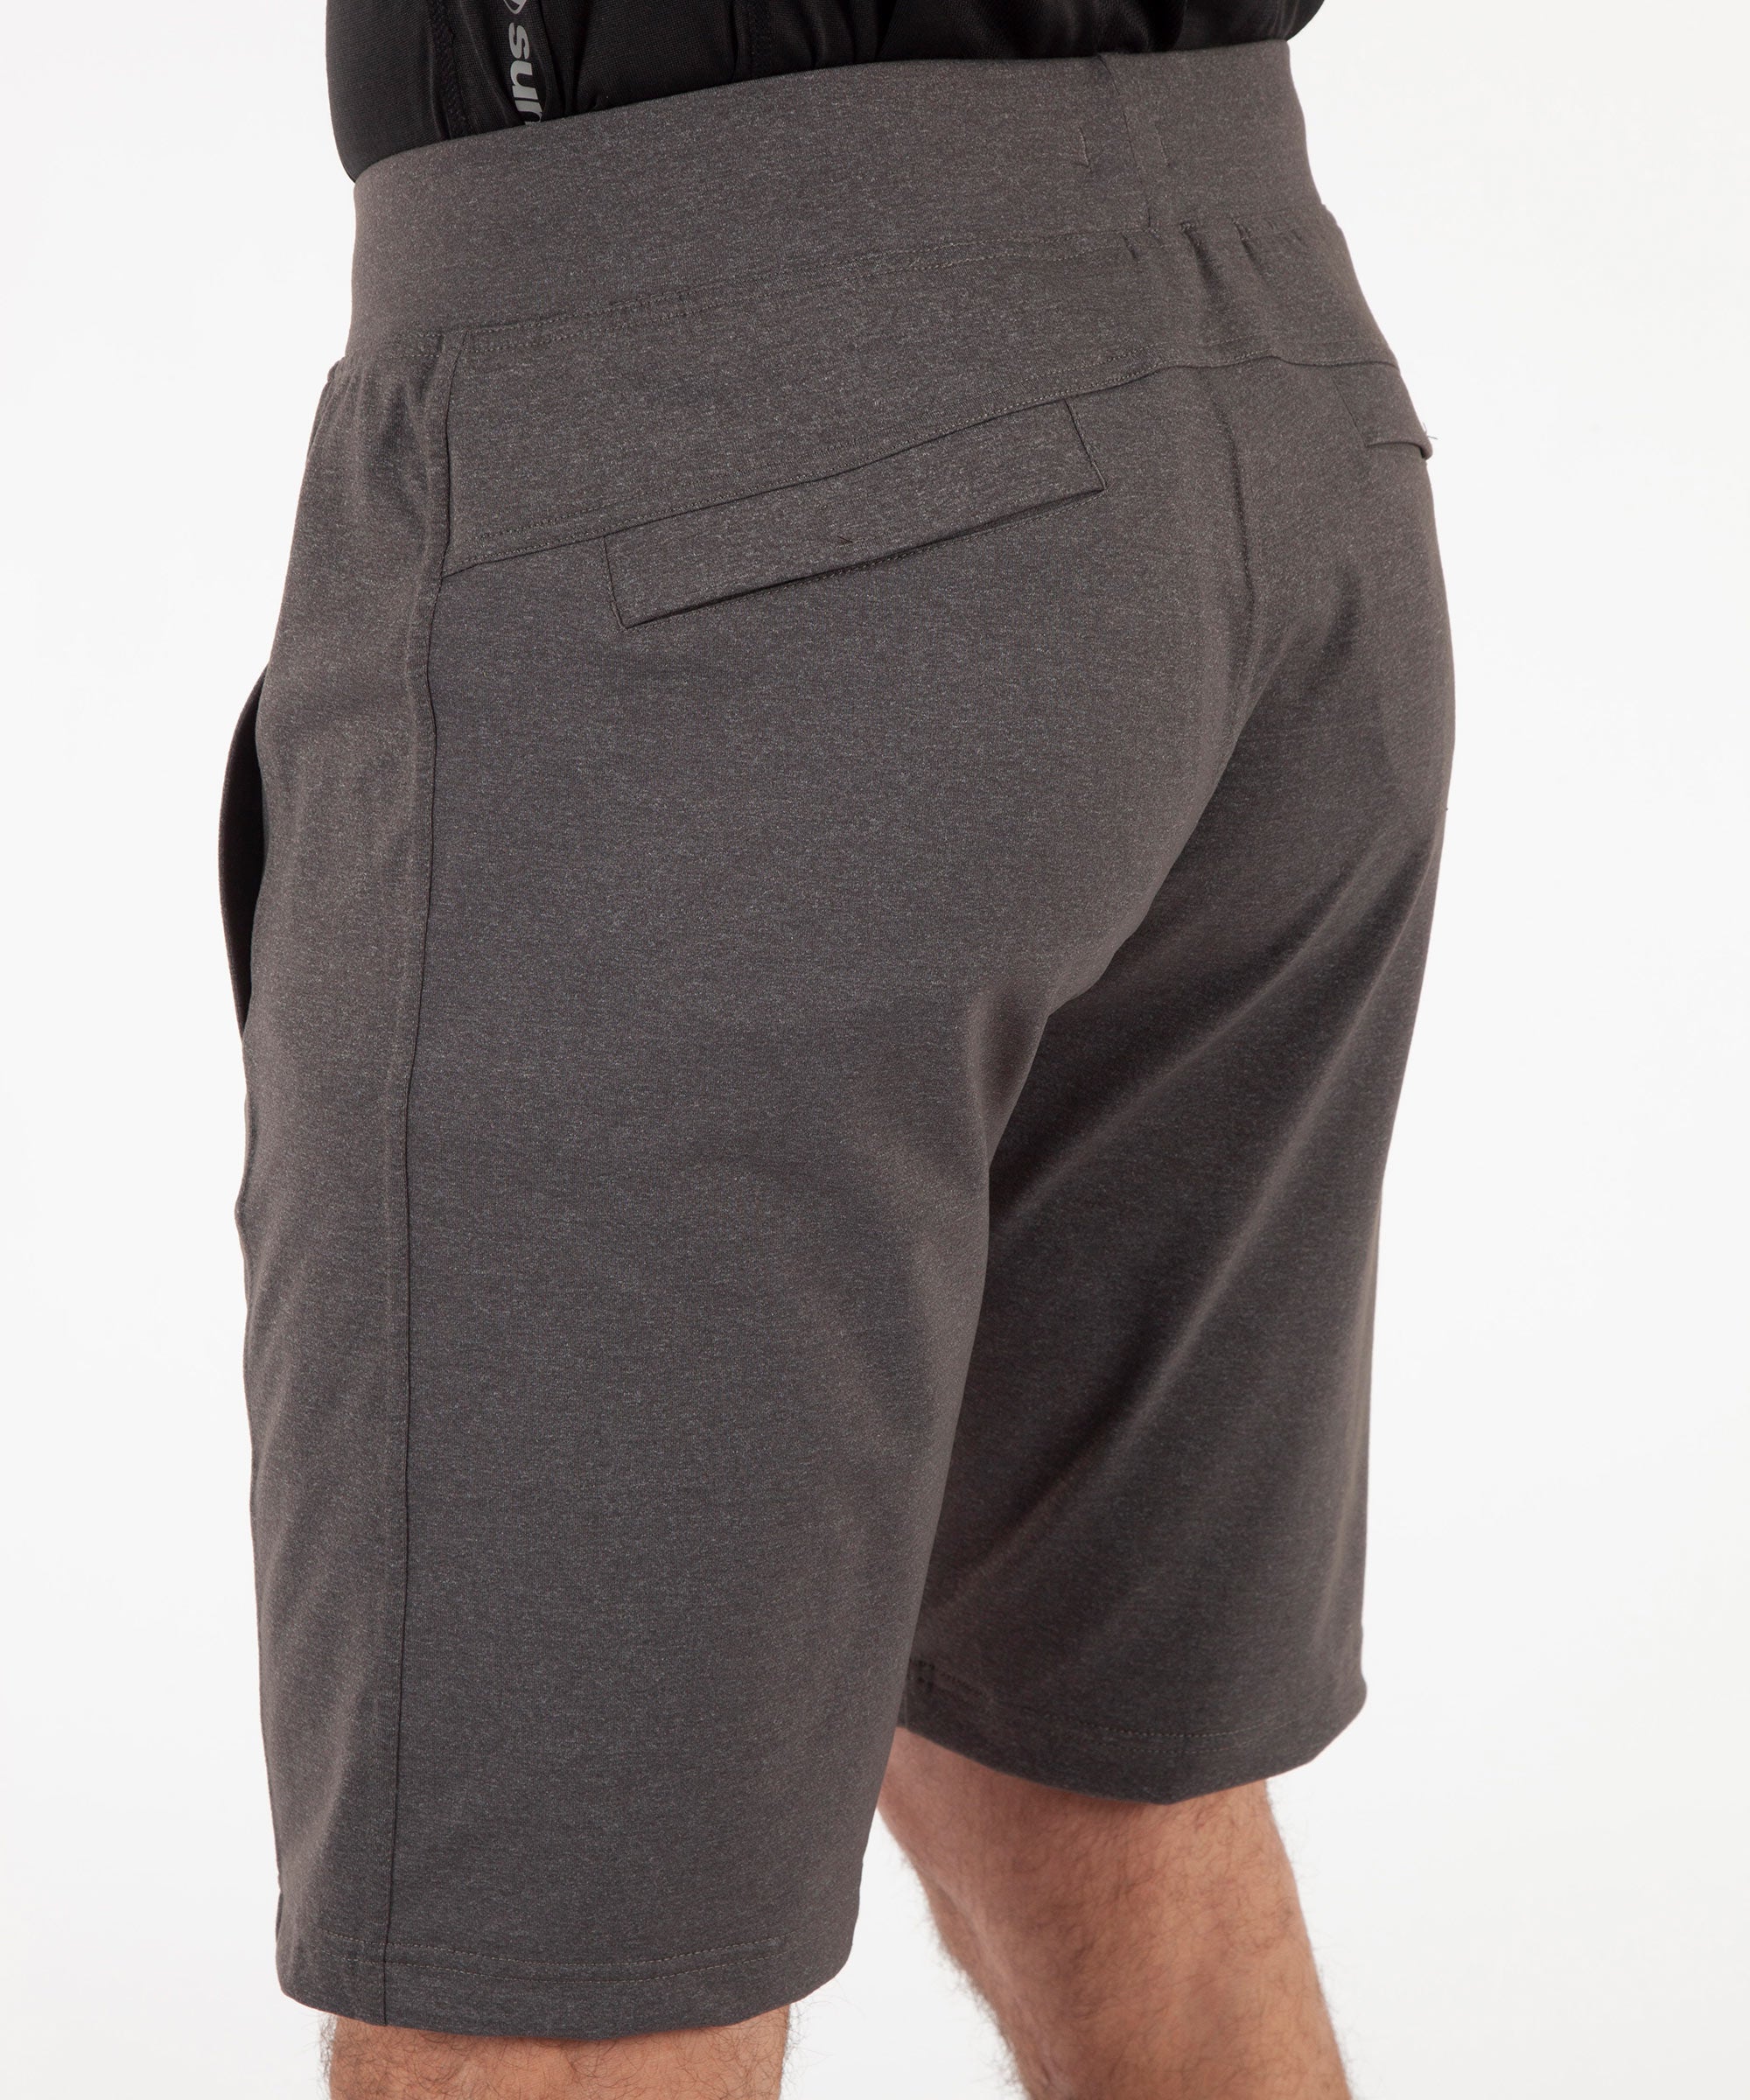  Cathalem Mens Shorts Athletic Men's Fitted Gym Shorts